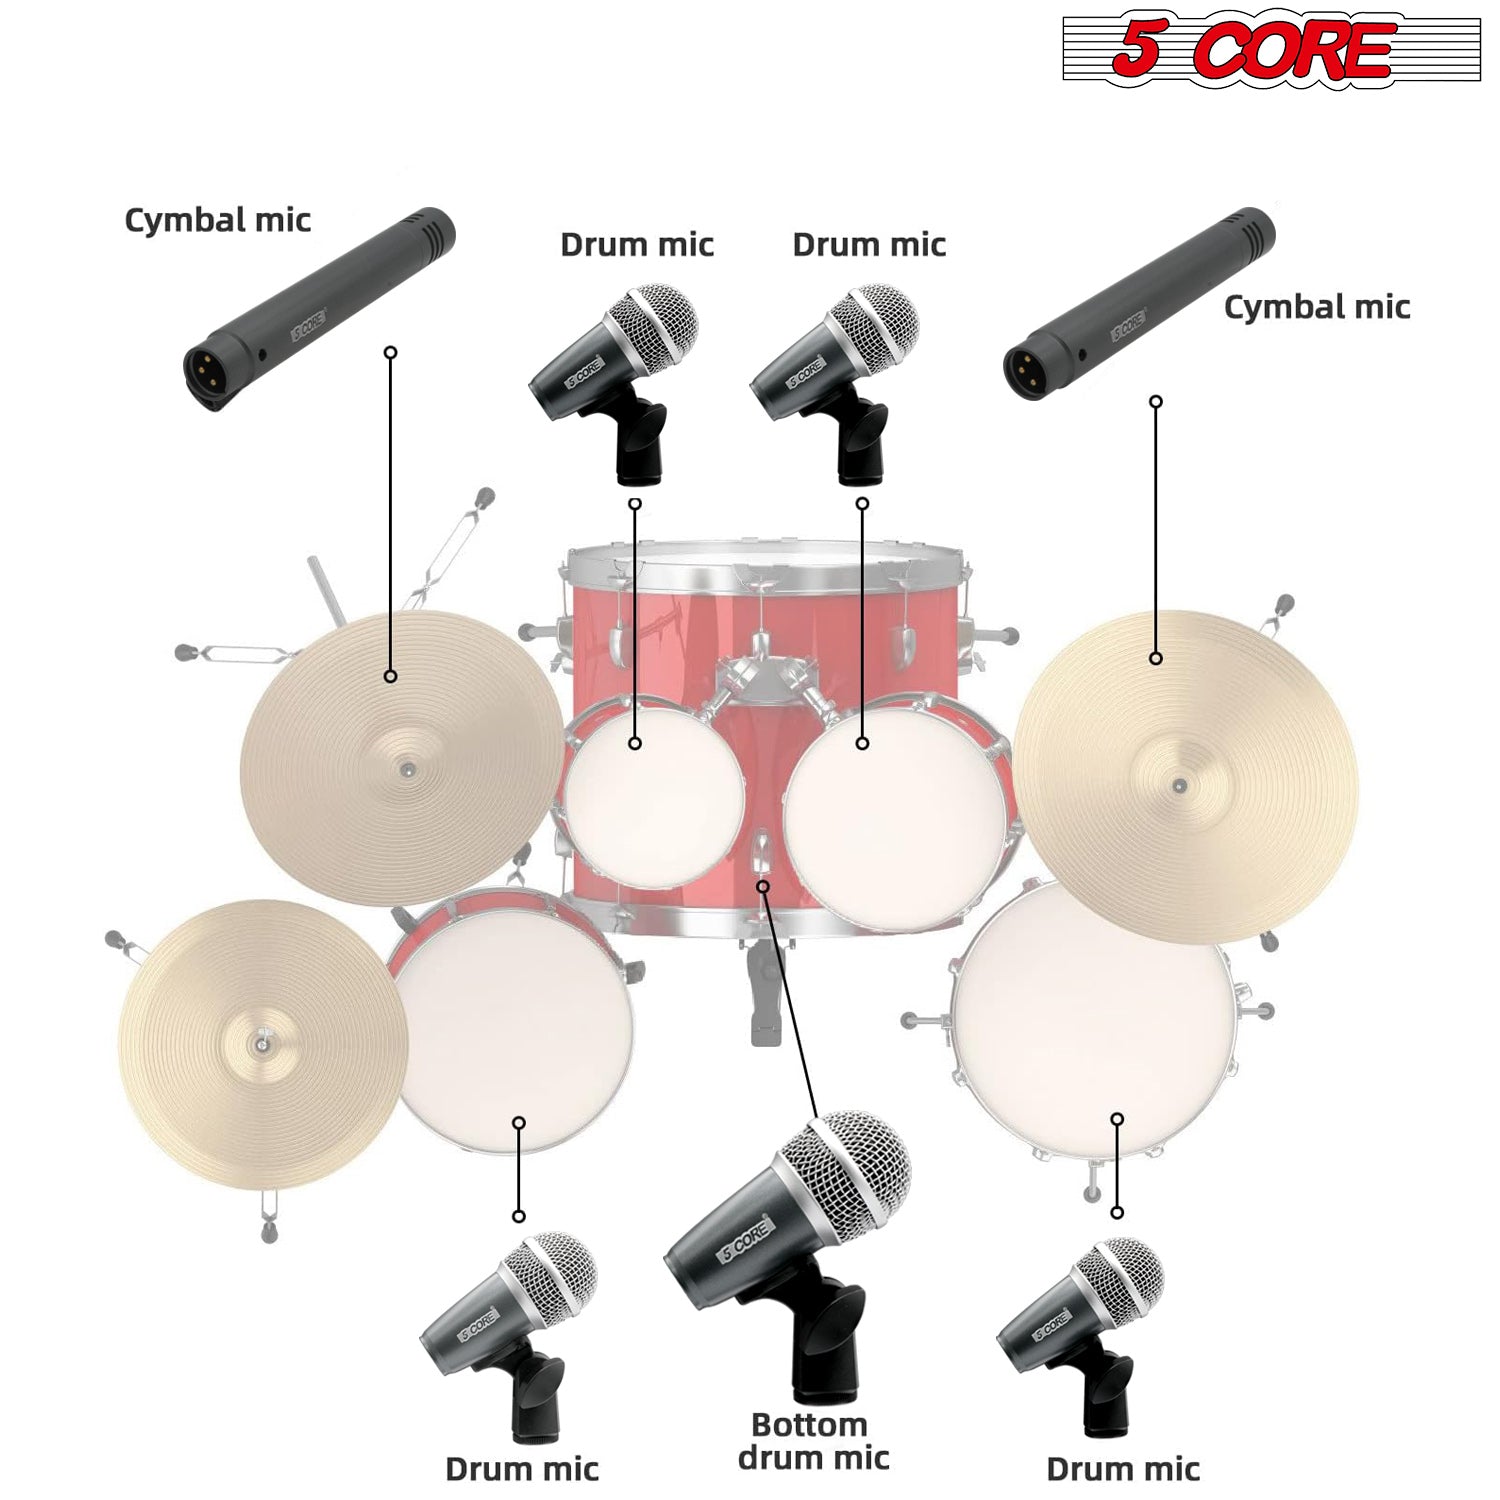 5 Core Drum Microphone Kit 7 Piece Wired Full Metal Dynamic Wired drums Mic Set for Drummers w/ Kick Bass Tom Snare + Silver Carrying Case Sponge & Thread Holder for Vocal & Instrument - DM 7RND BLK